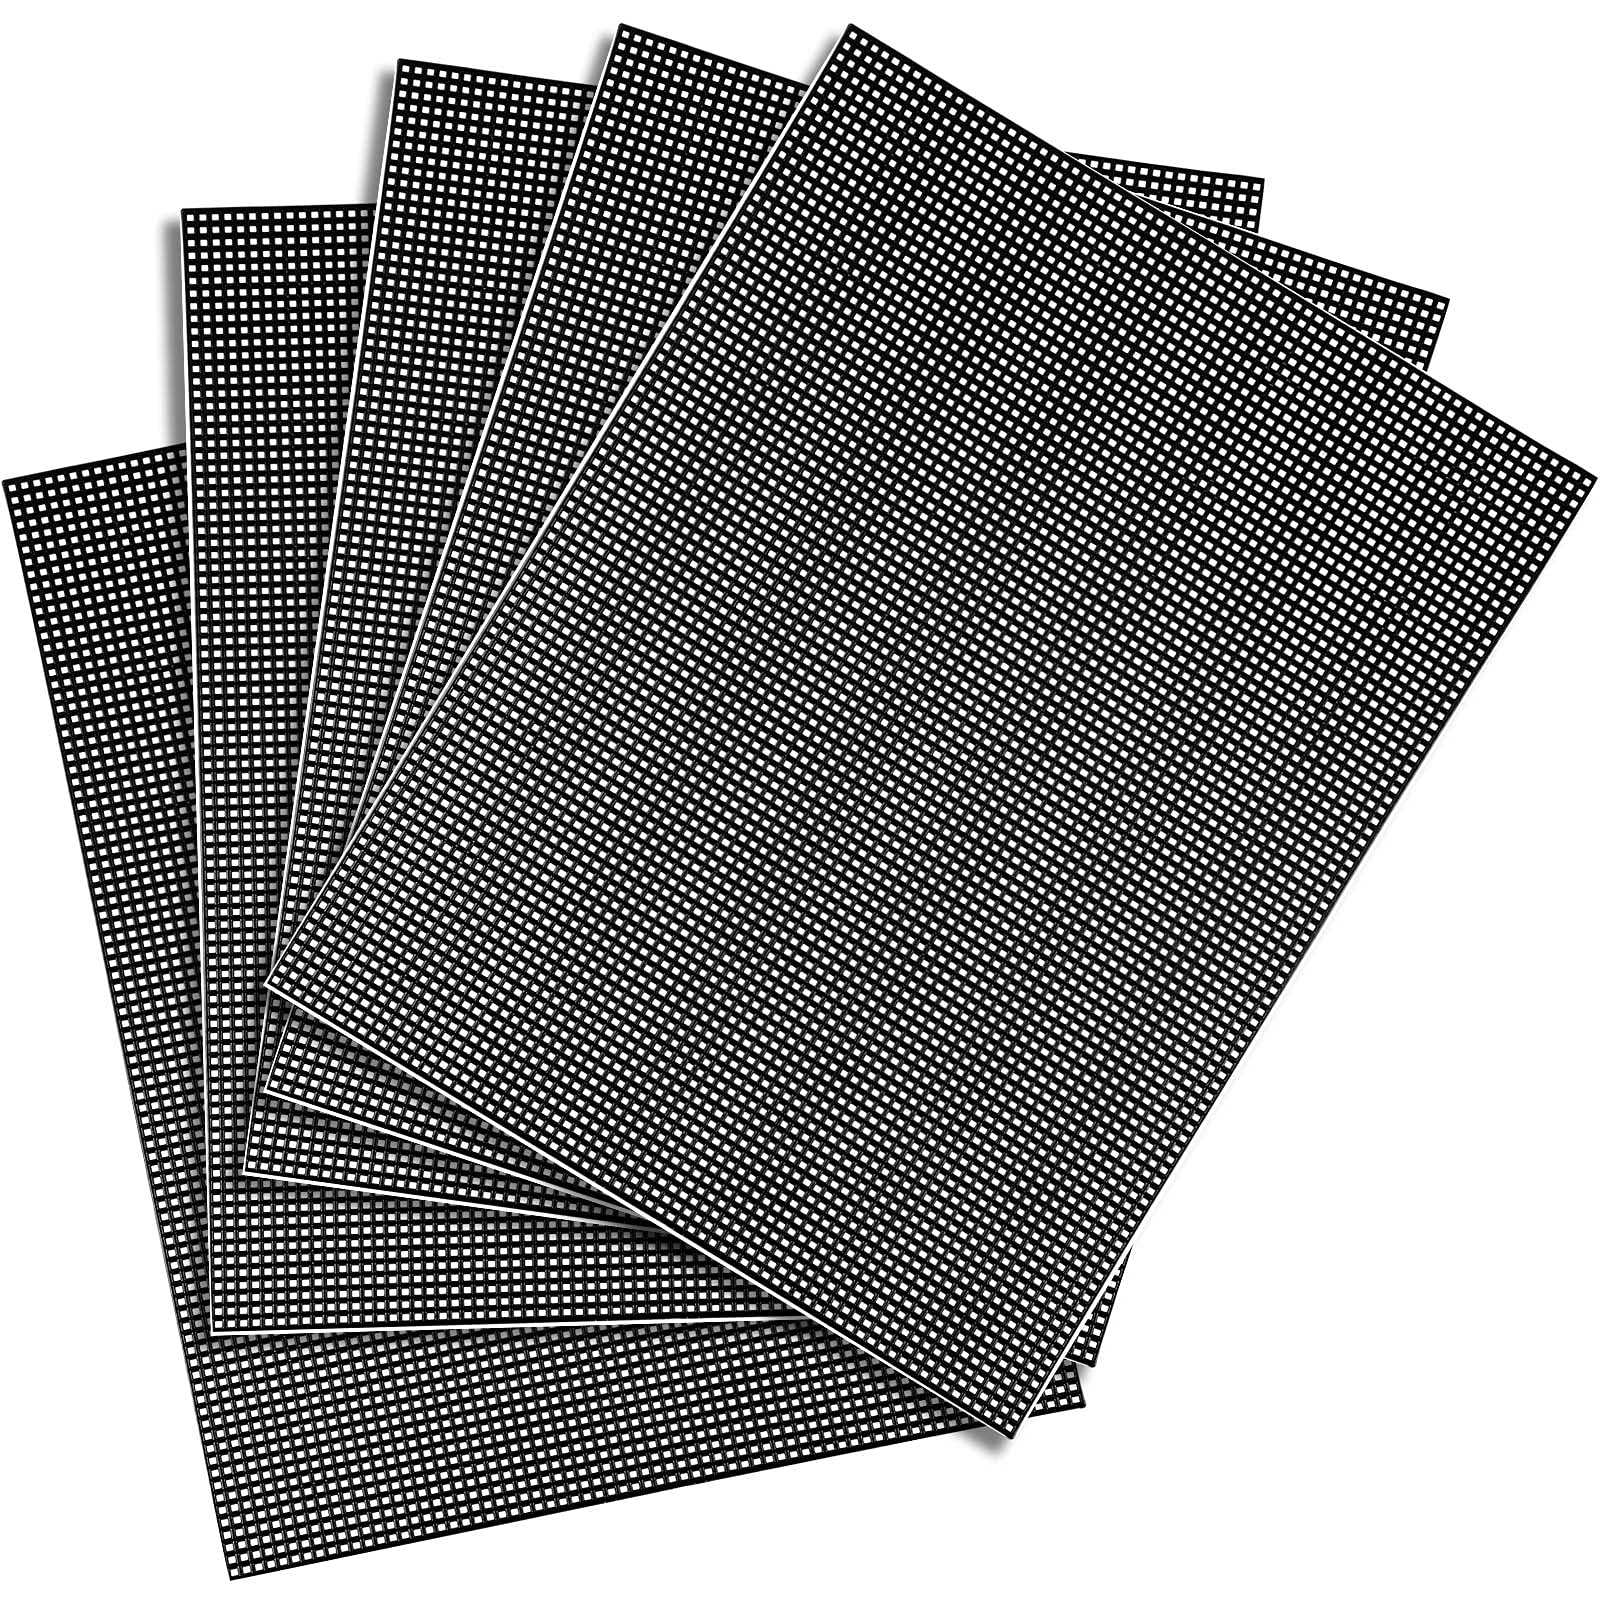 5 Pieces Black Plastic Mesh Canvas Plastic Mesh Sheets for Embroidery  Crafting Knit and Crochet Projects Acrylic Yarn Crafting, 13.2 x 10.2 Inch